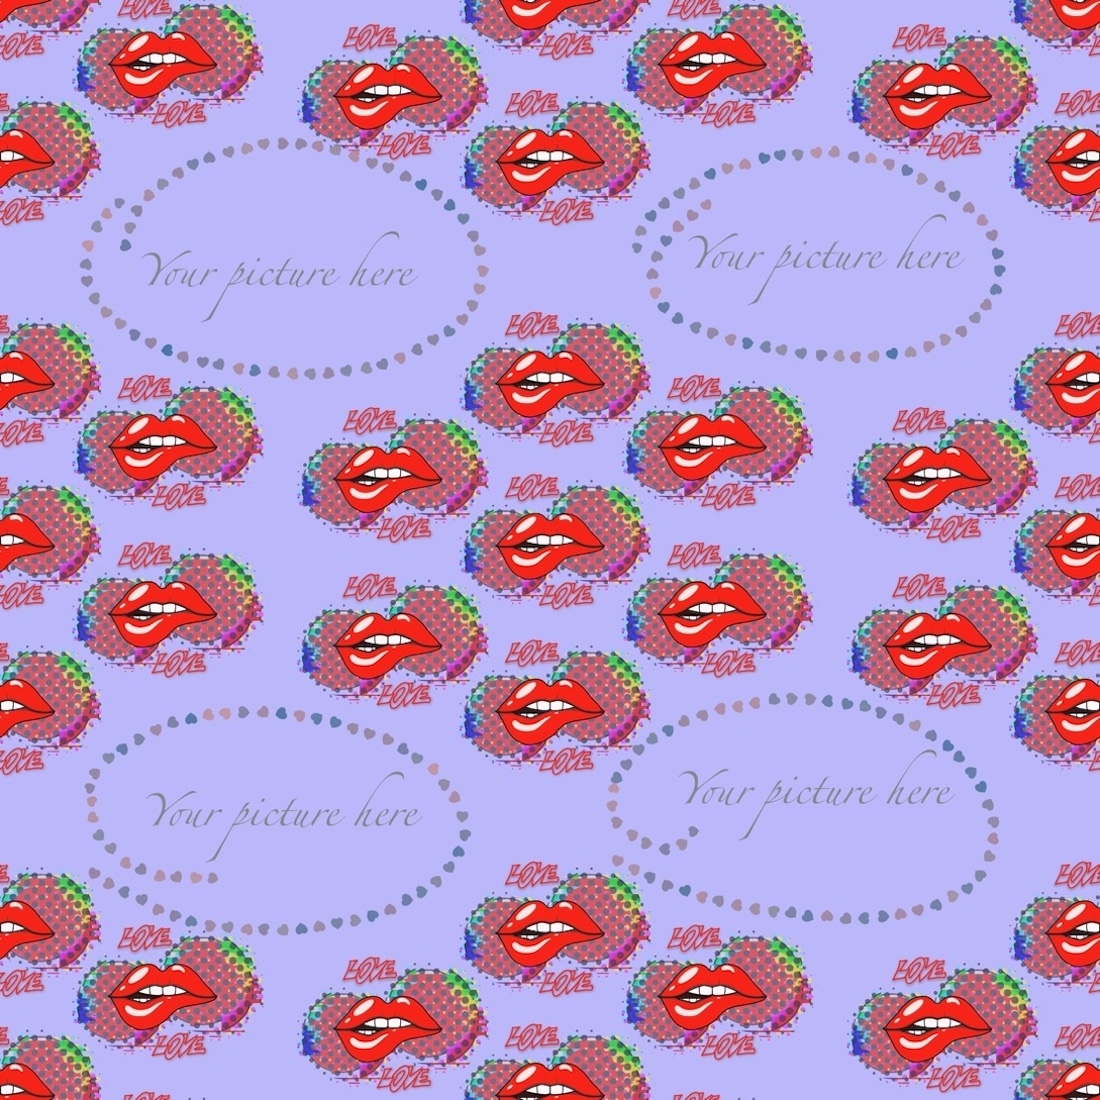 Love, Hearts & Lips Seamless Patterns preview image.